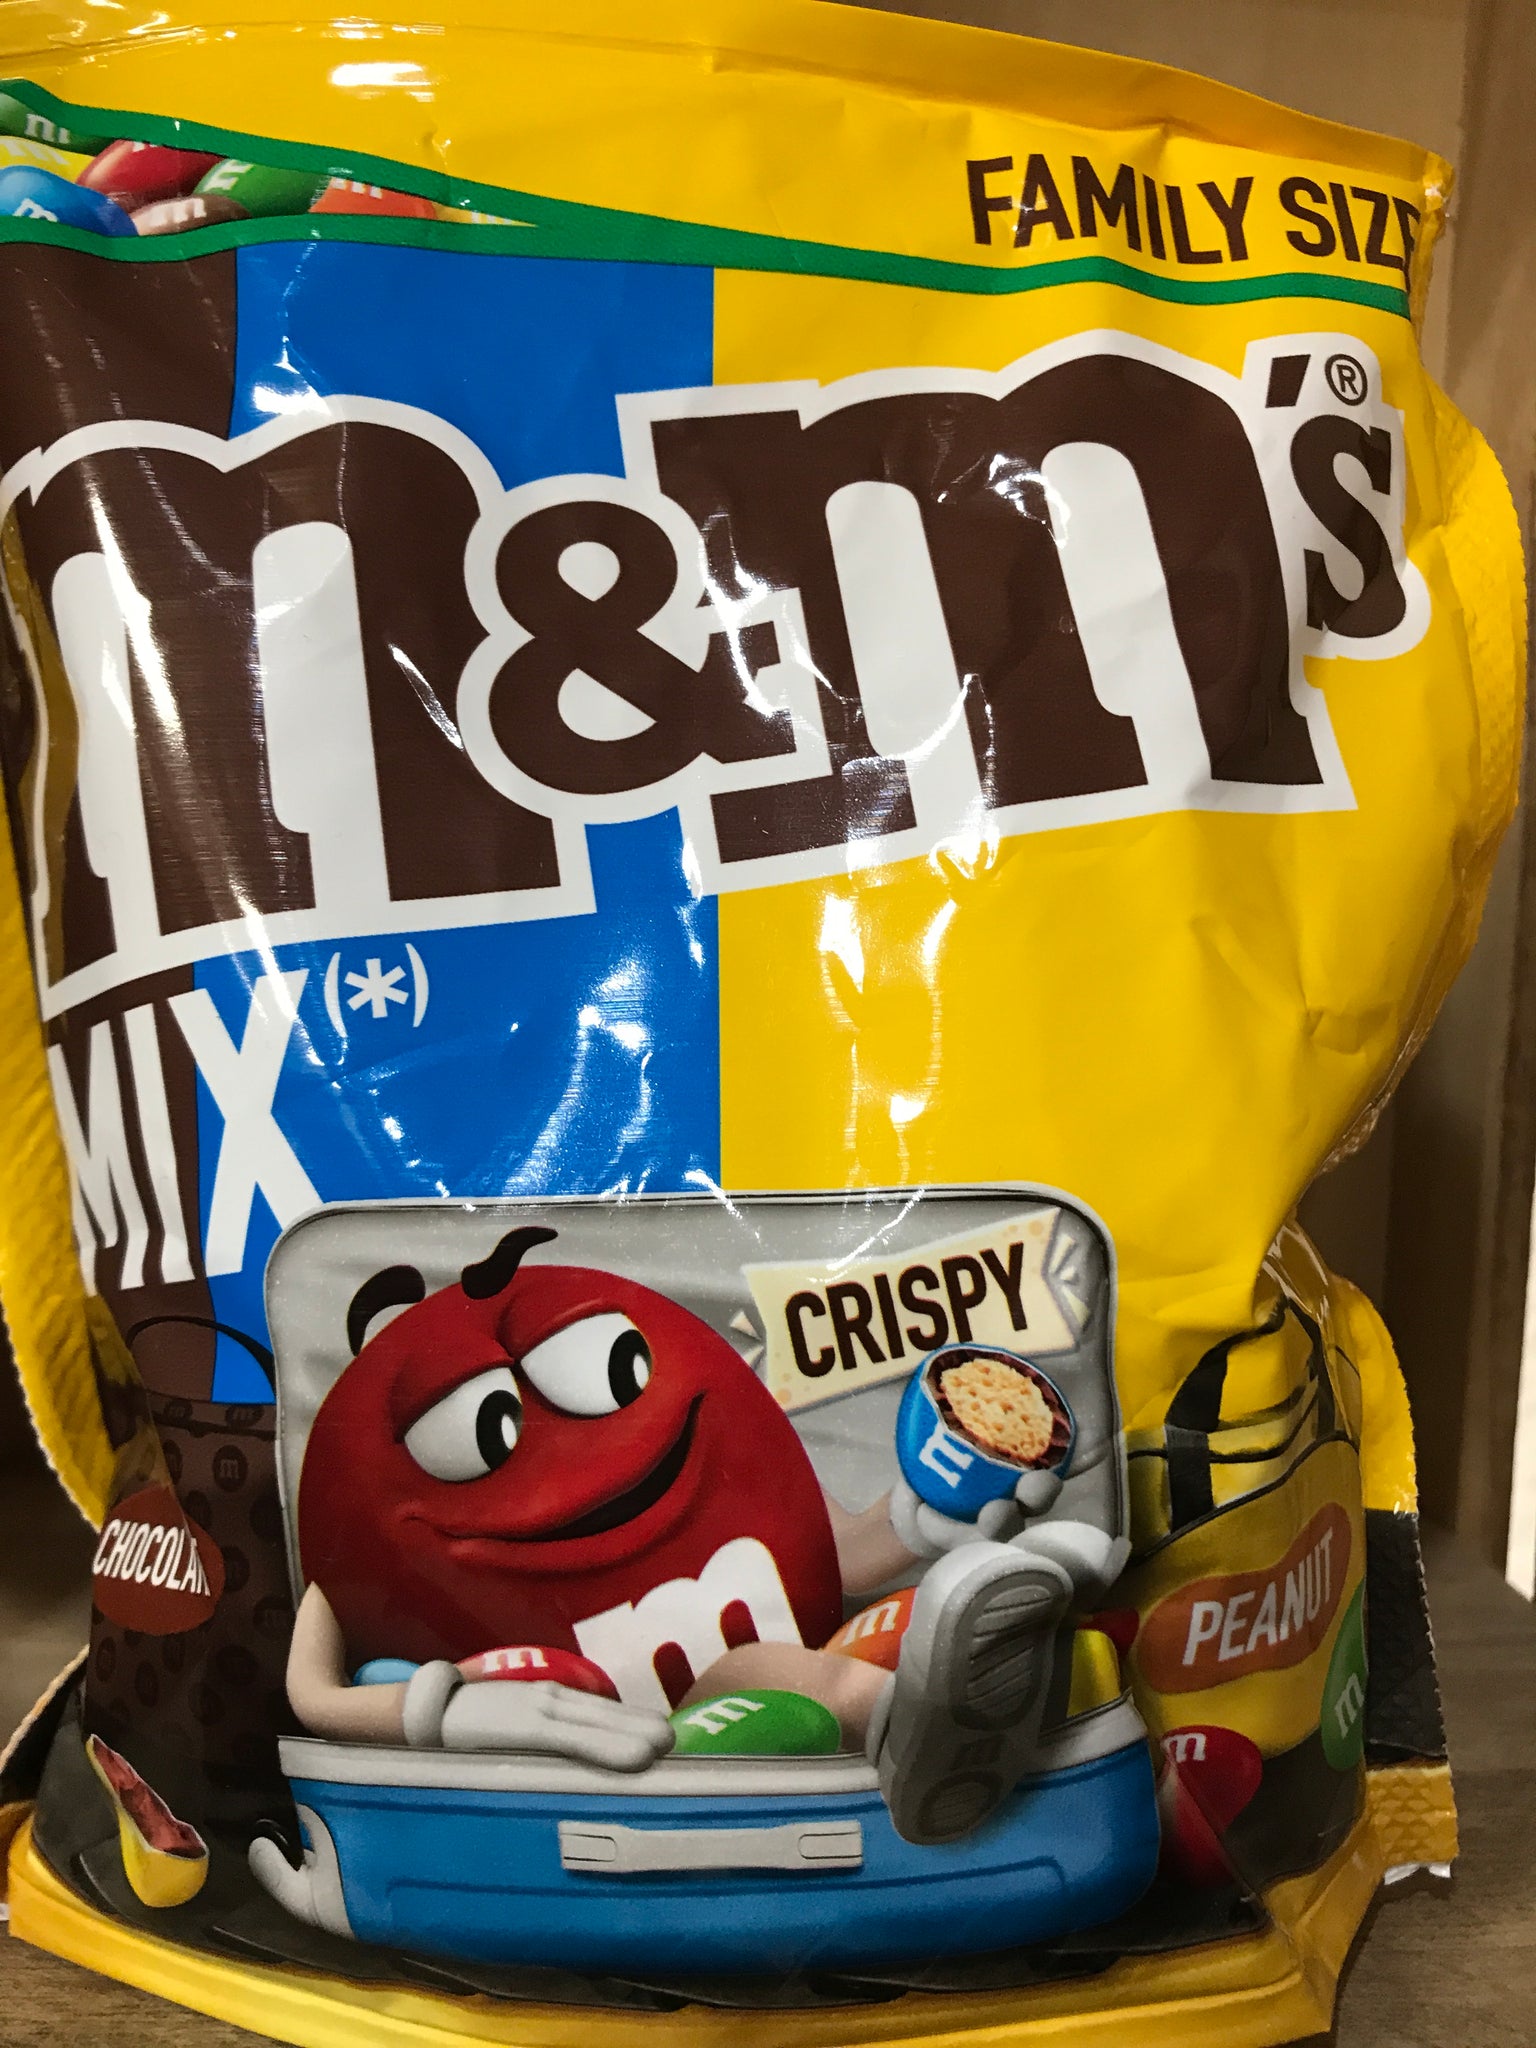 M&M's is launching Mix bags for indecisive snackers